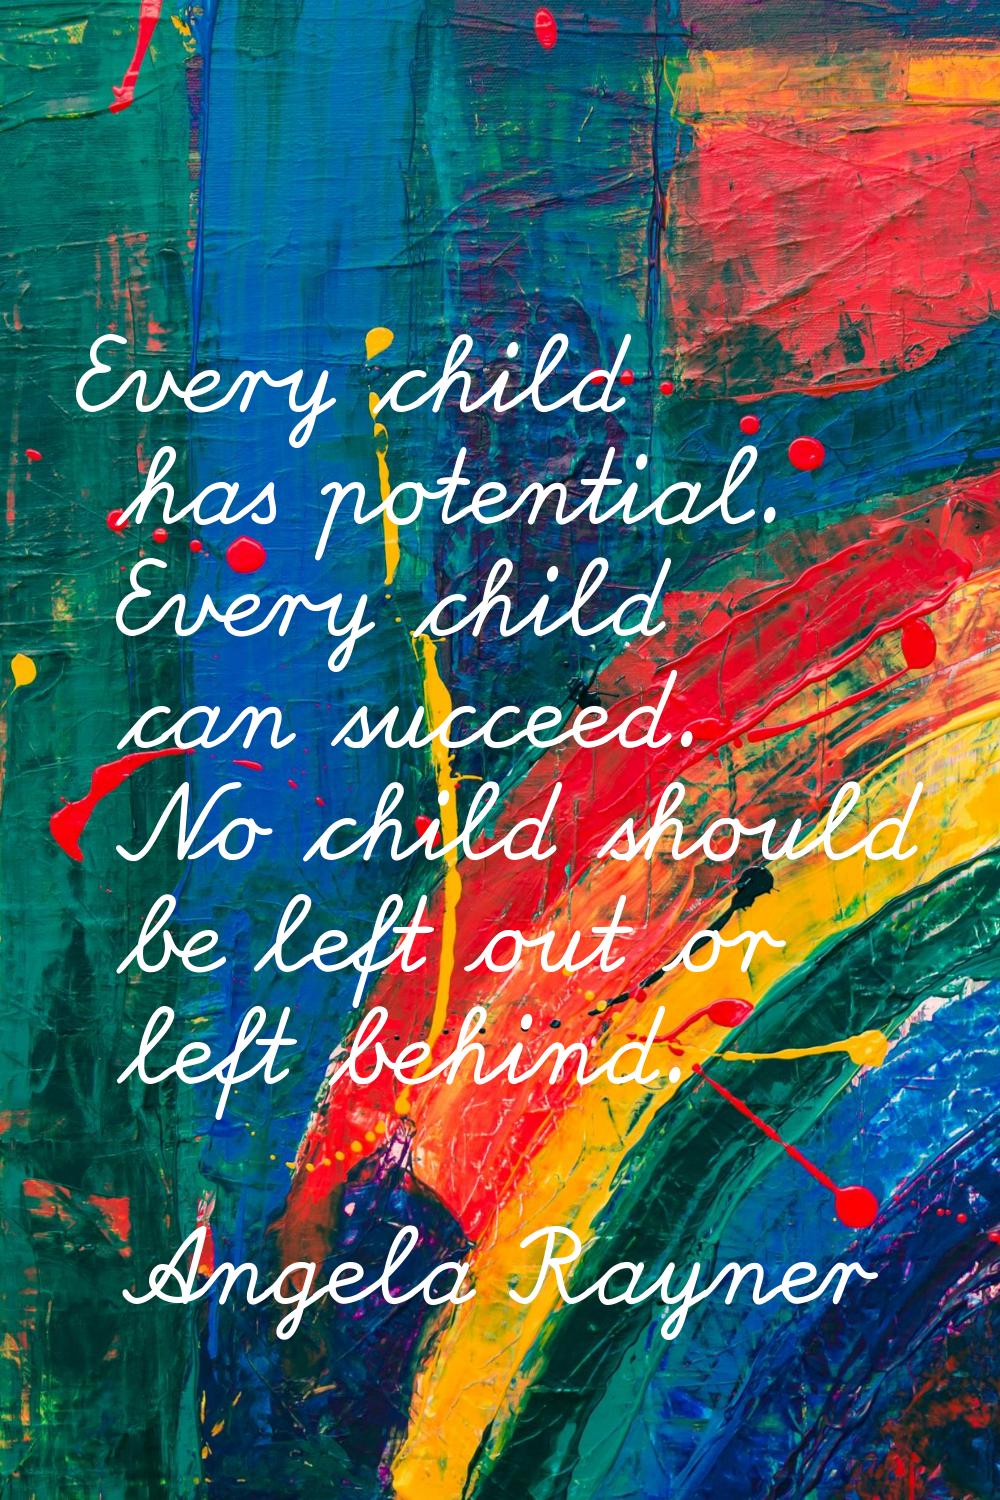 Every child has potential. Every child can succeed. No child should be left out or left behind.